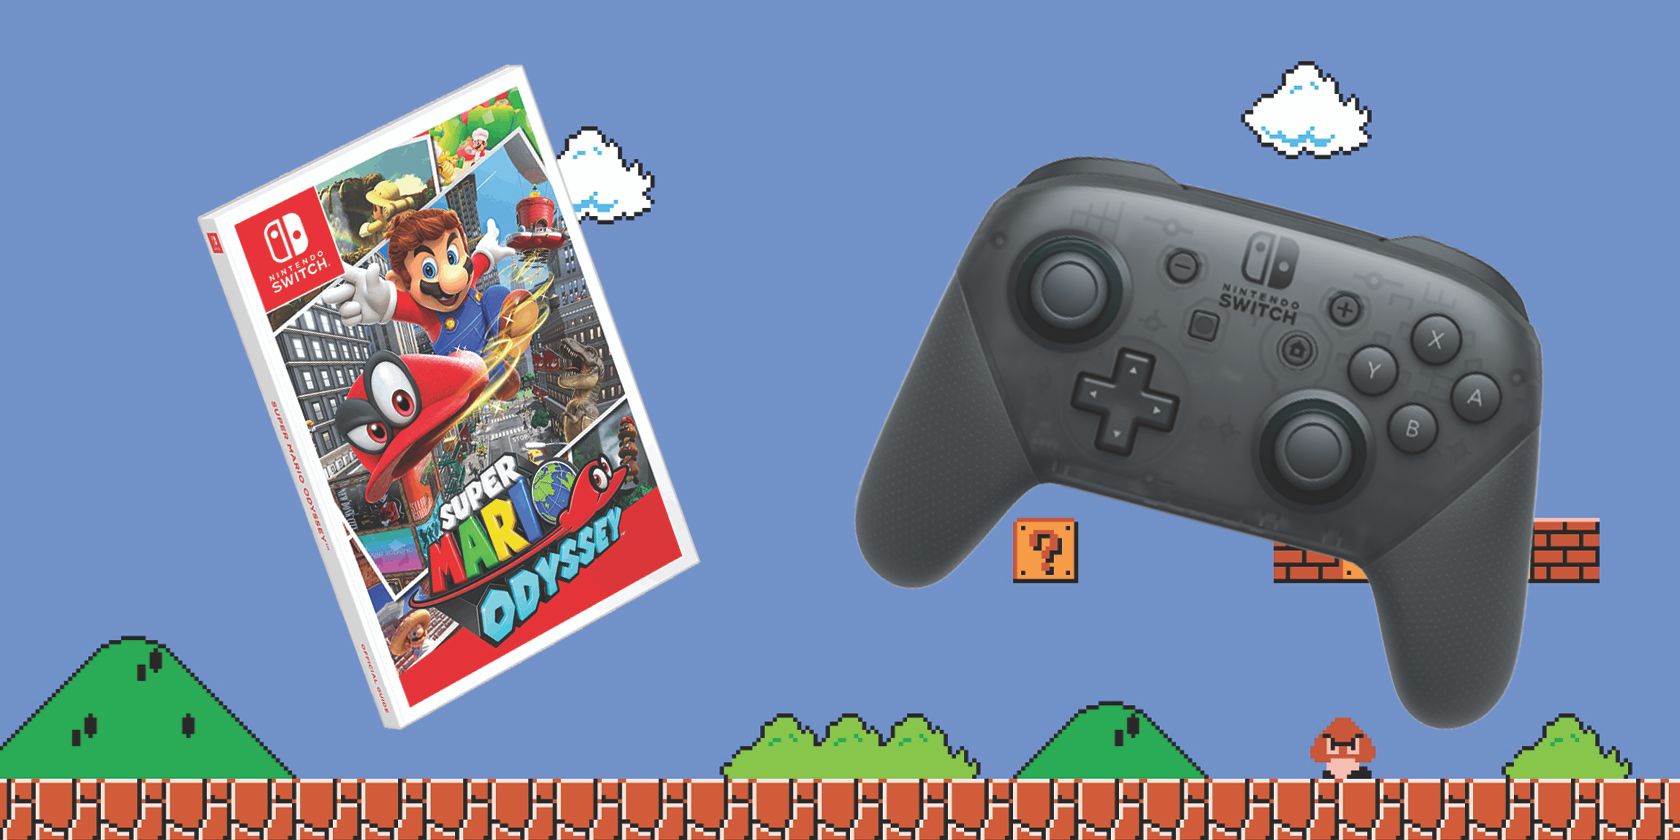 mario odyssey game box with siwtch pro controller on a Super Mario background